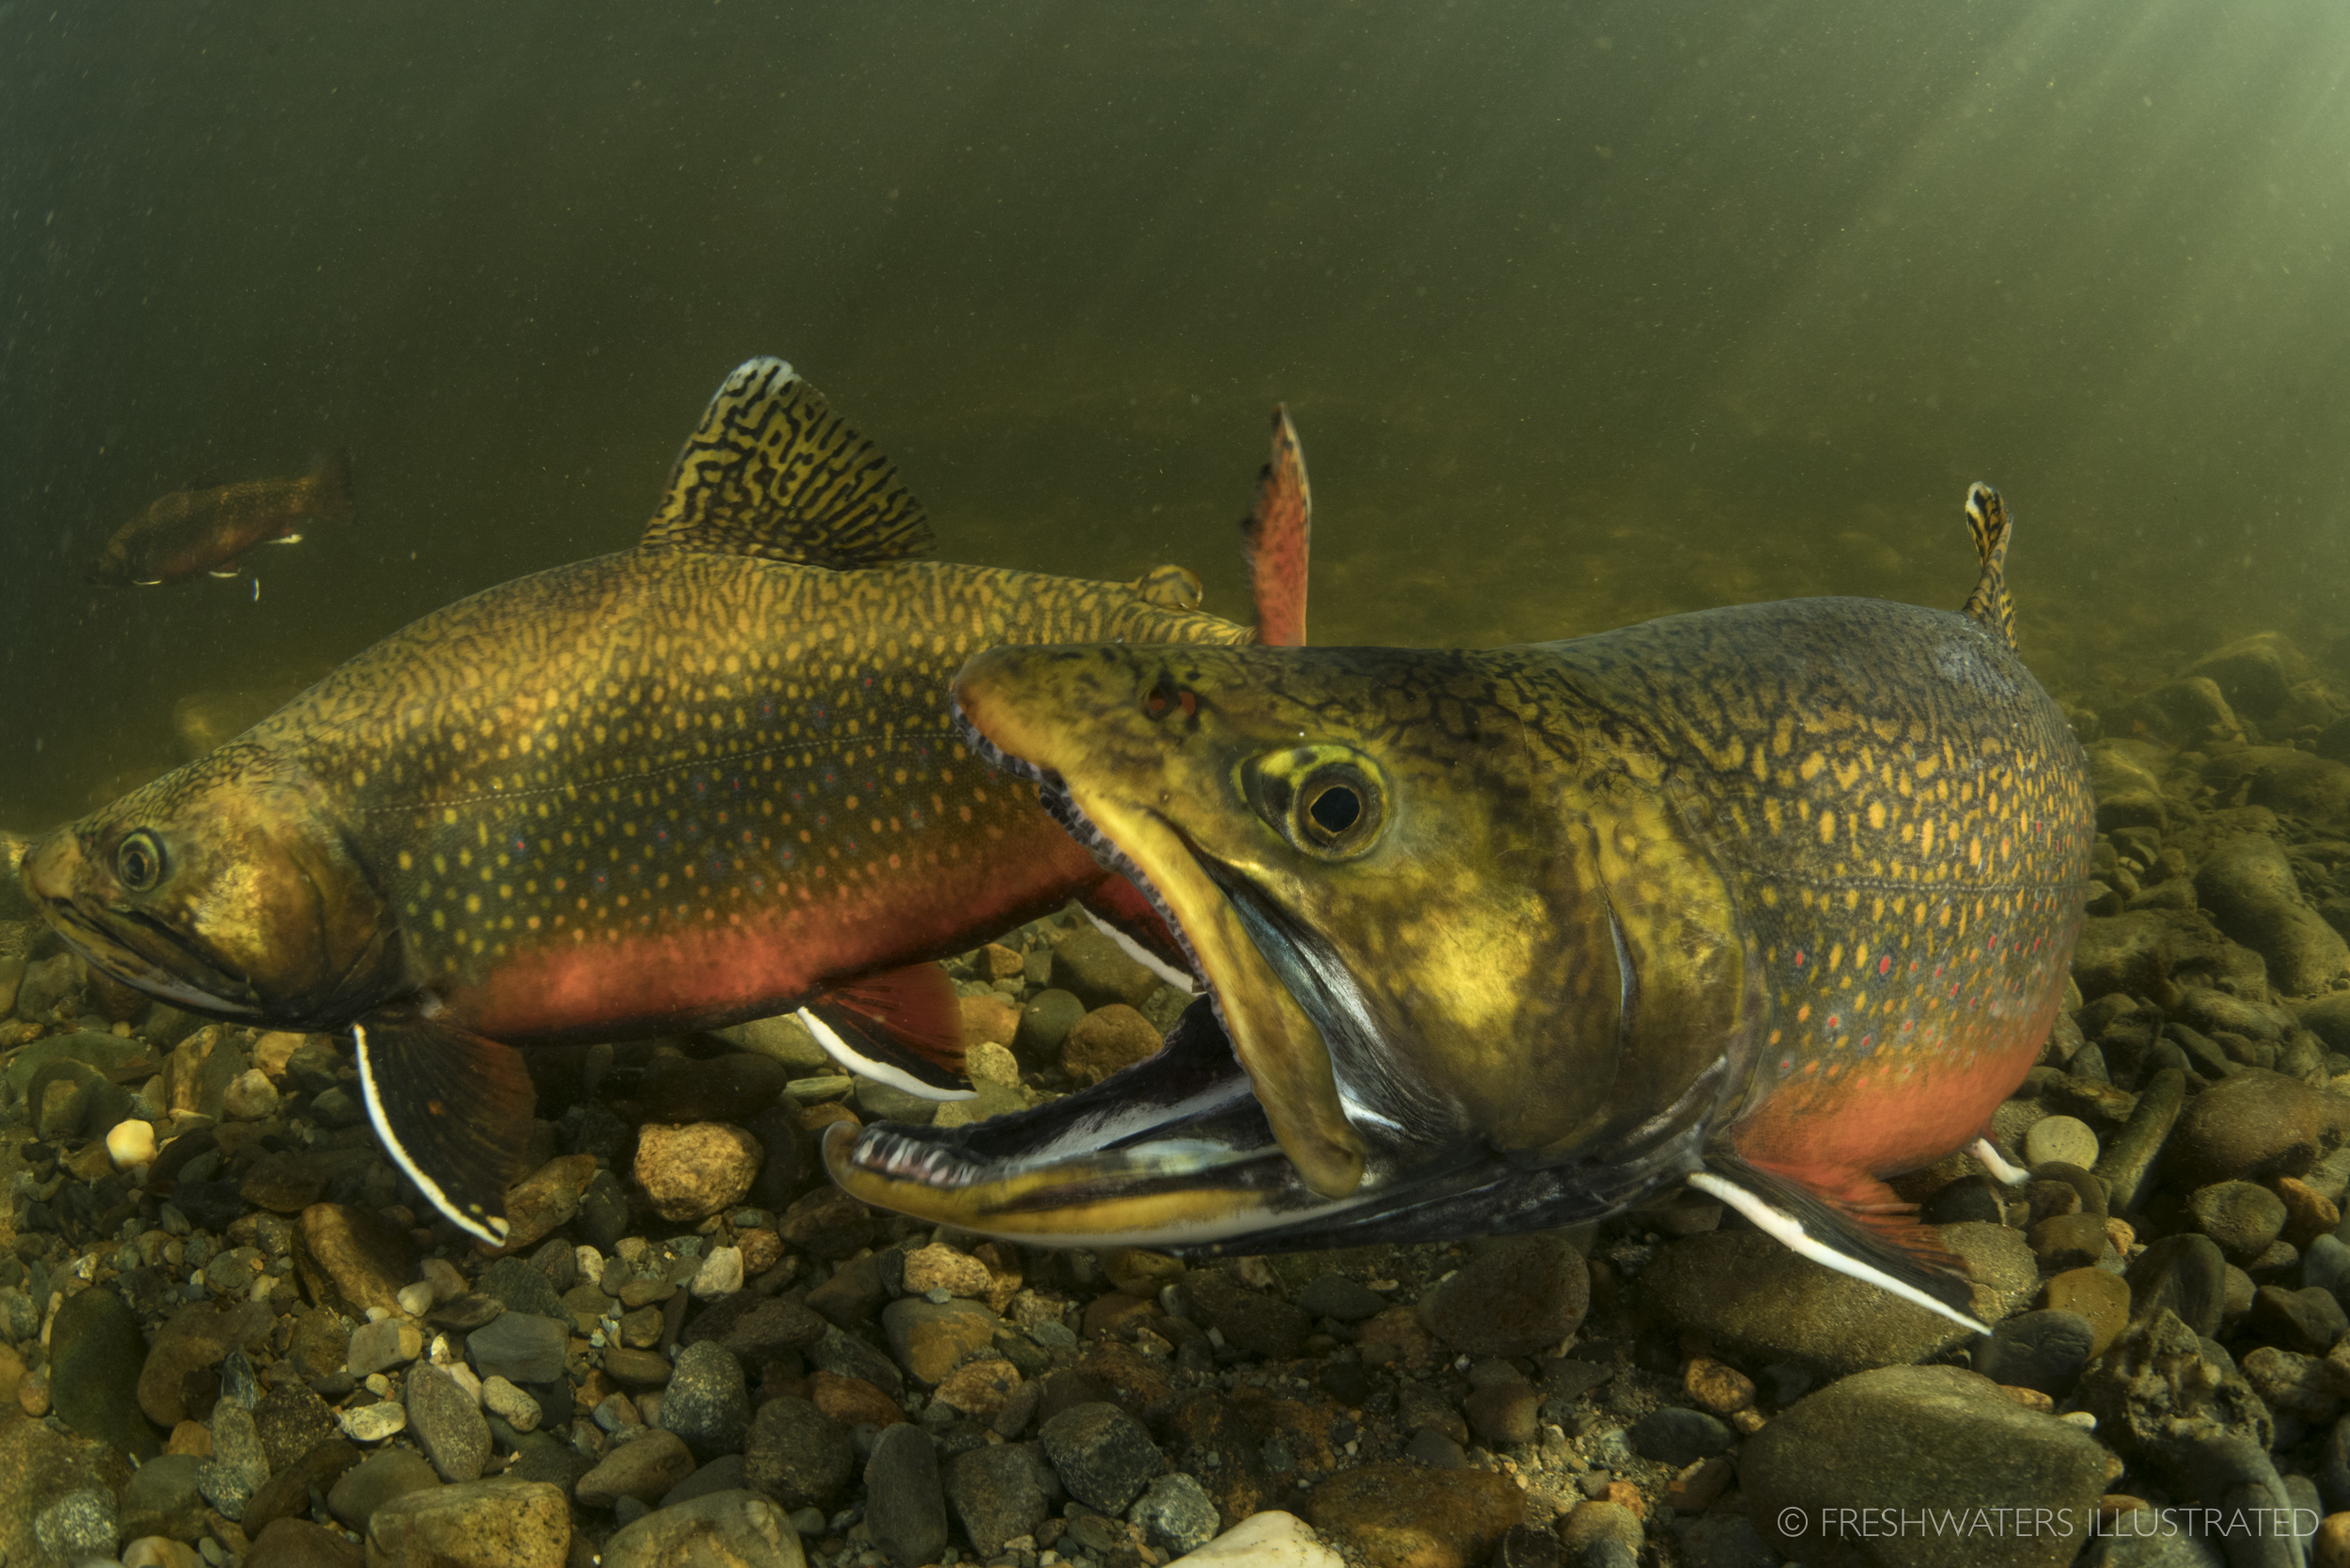  Two male Brook Trout (Salvelinus fontinalis) fight over the opportunity to spawn with a female. Magalloway River, Maine  www.FreshwatersIllustrated.org  